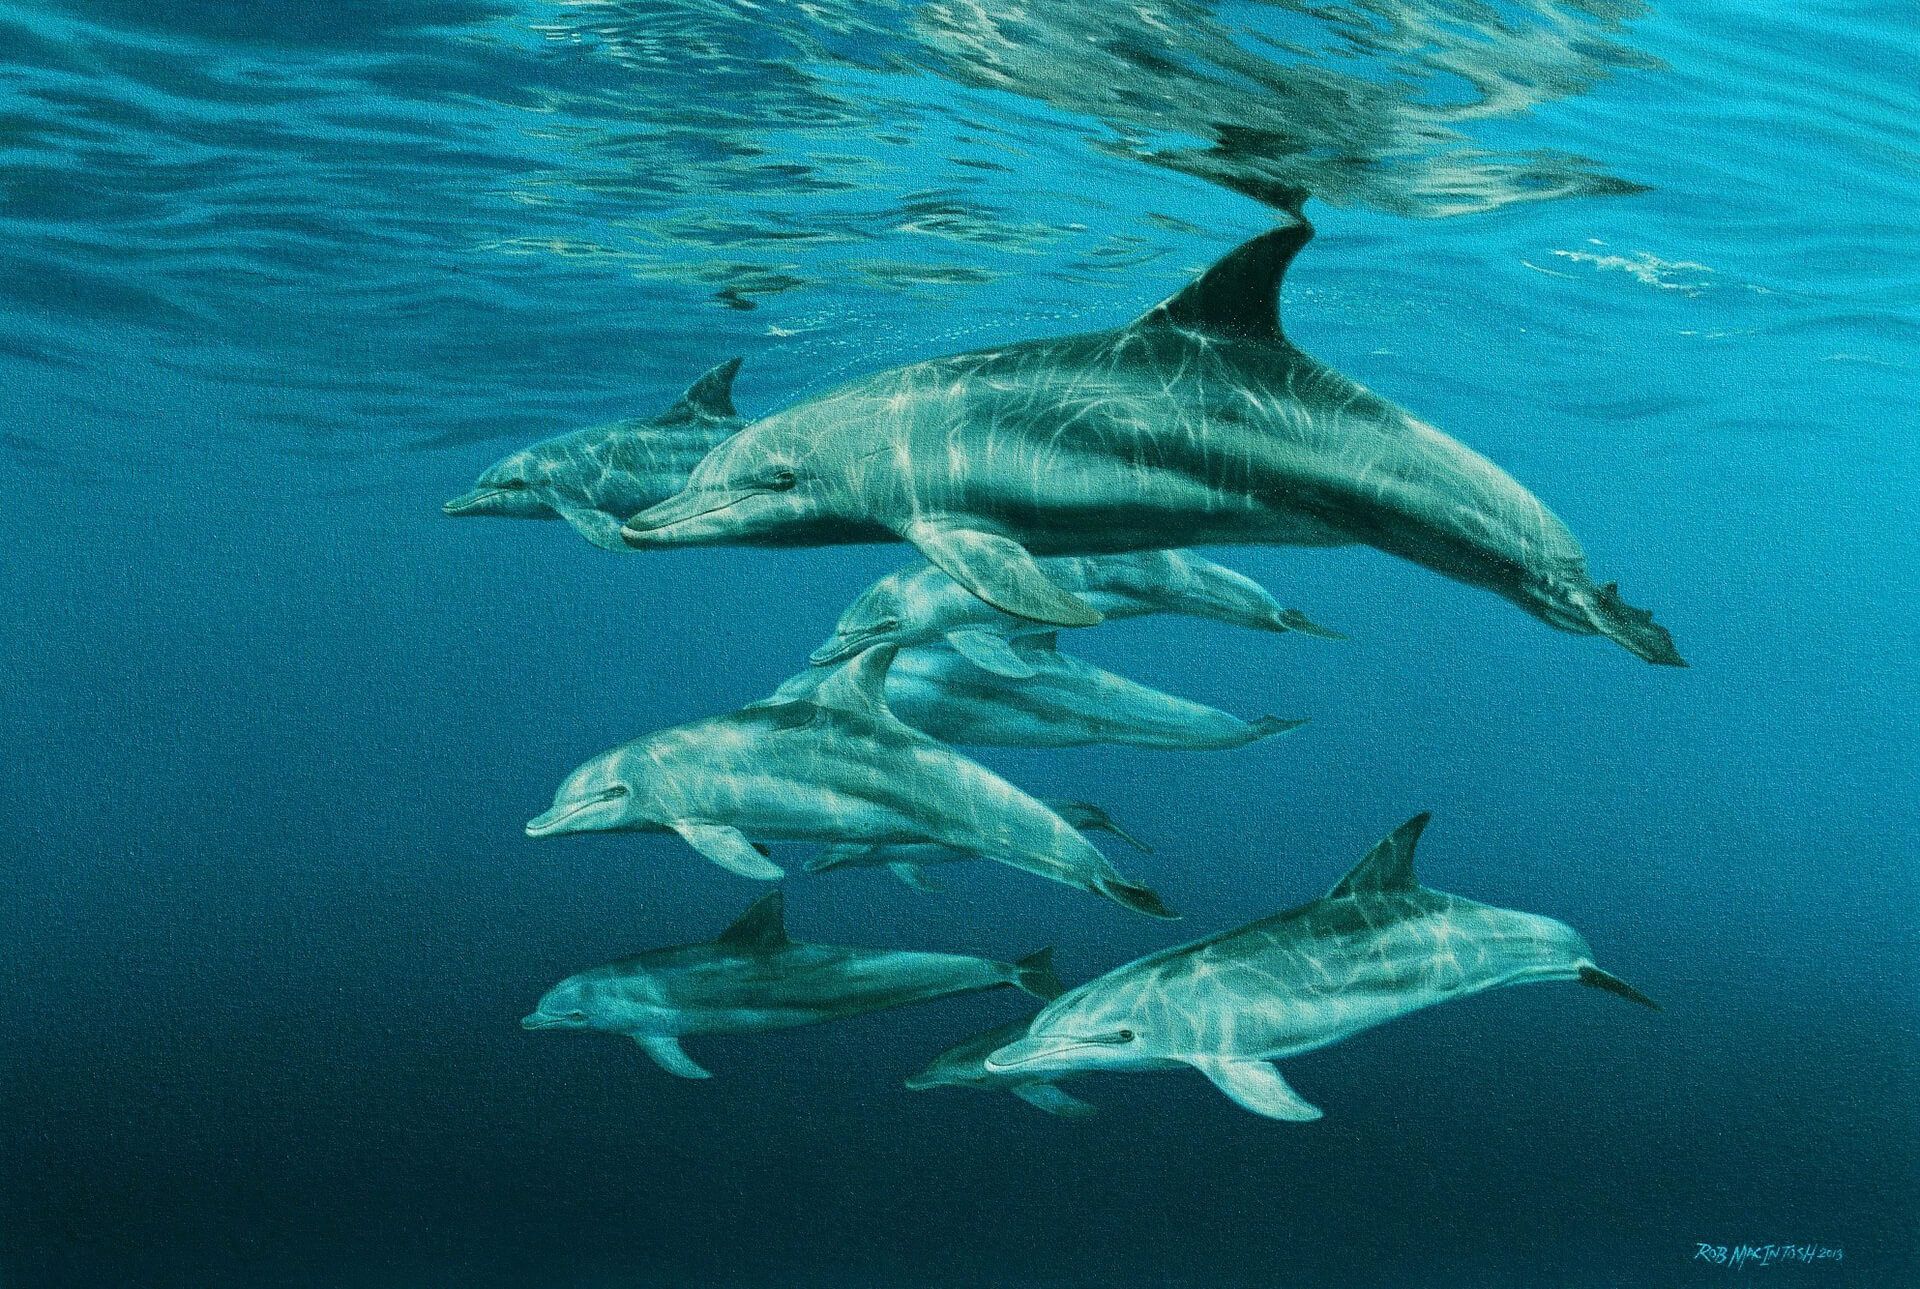 Photorealistic painting of a pod of dolphins